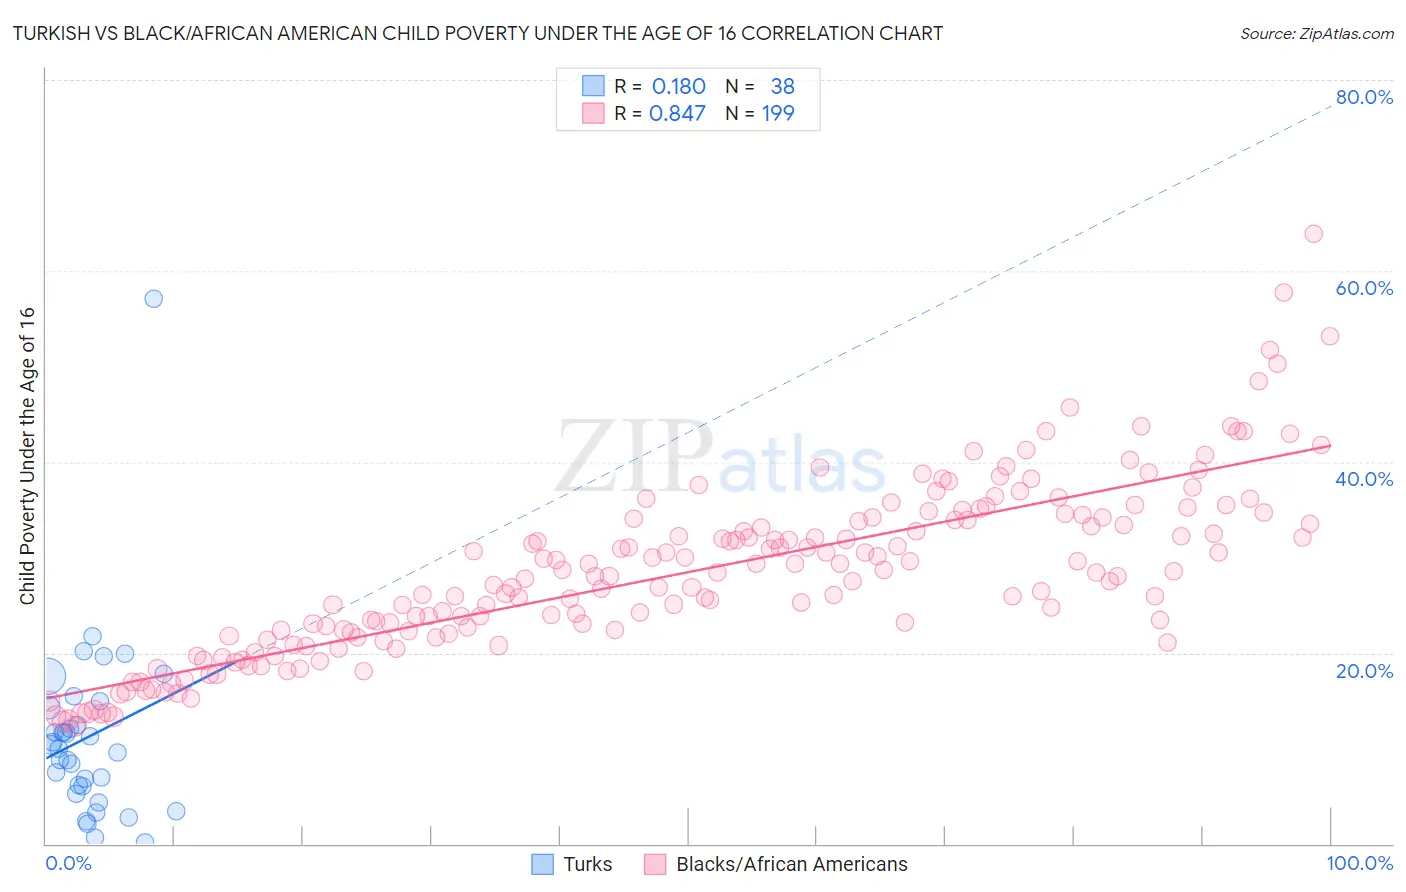 Turkish vs Black/African American Child Poverty Under the Age of 16